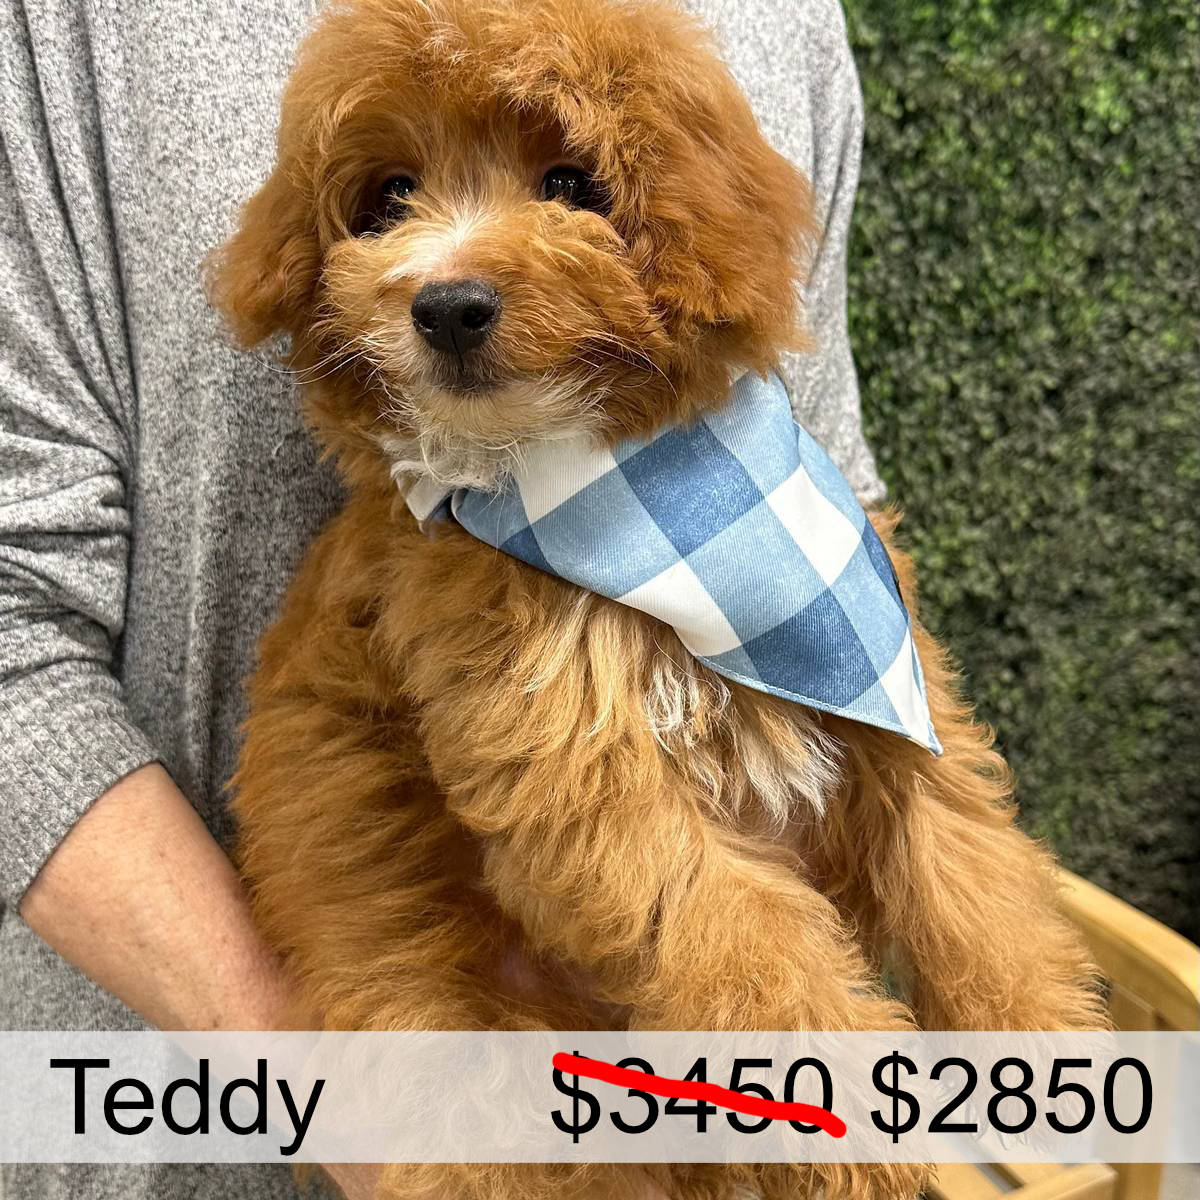 Teddy-Red_Apricot-Male-Toy-Goldendoodle-Petite-Posh-Puppies_April Markdown Promo